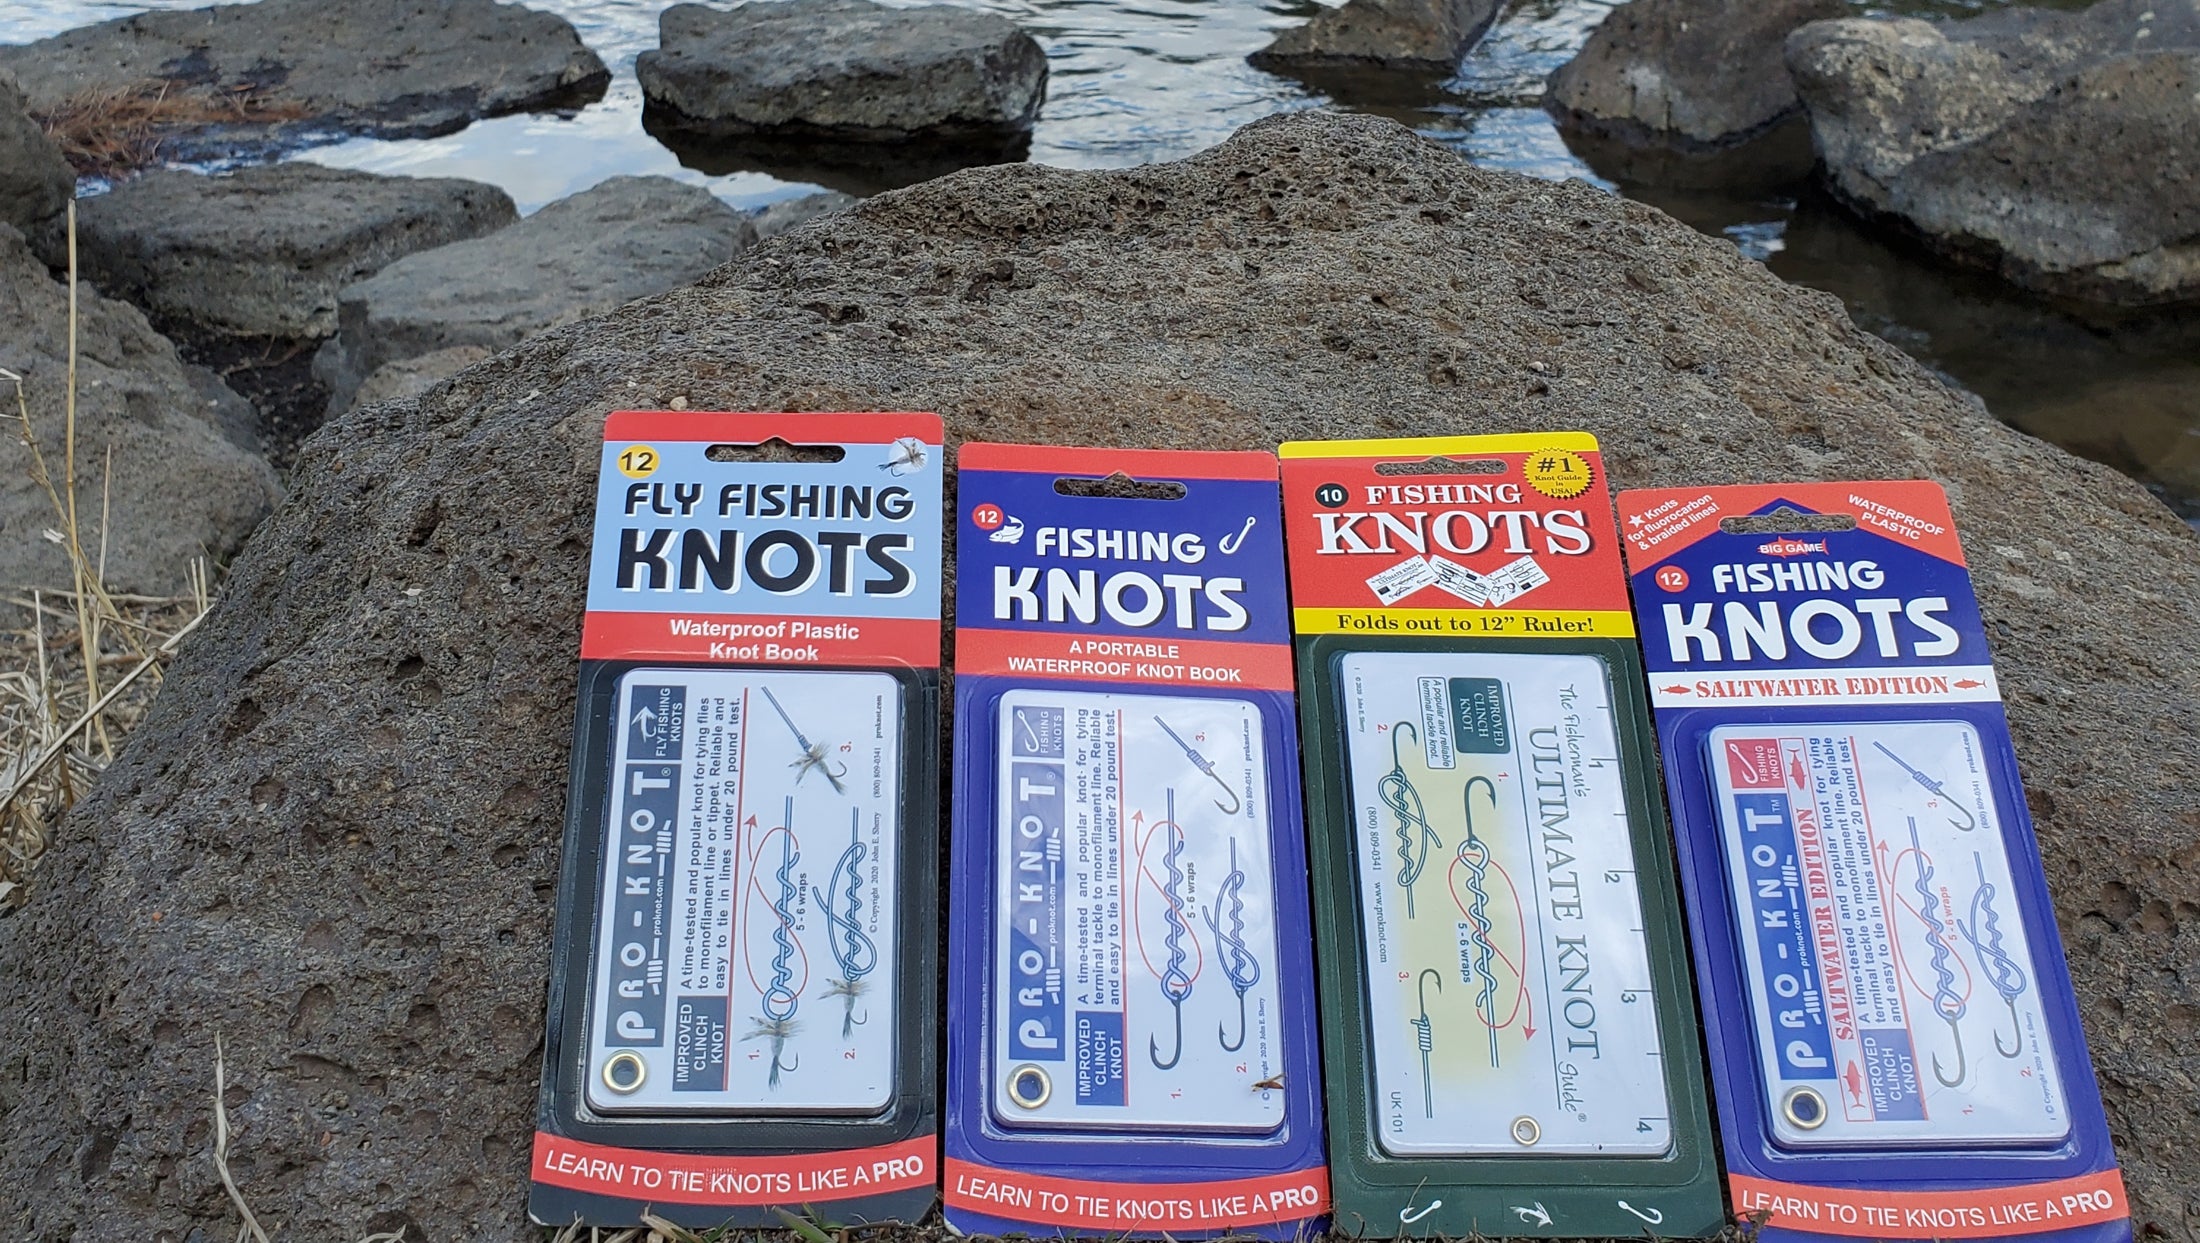 Saltwater Fishing Knot Cards - Waterproof Pocket Guide To 15 Big Game  Fishing KnotsIncludes Portable Book Of Inshore And Deep Sea Fishing Knots  And A